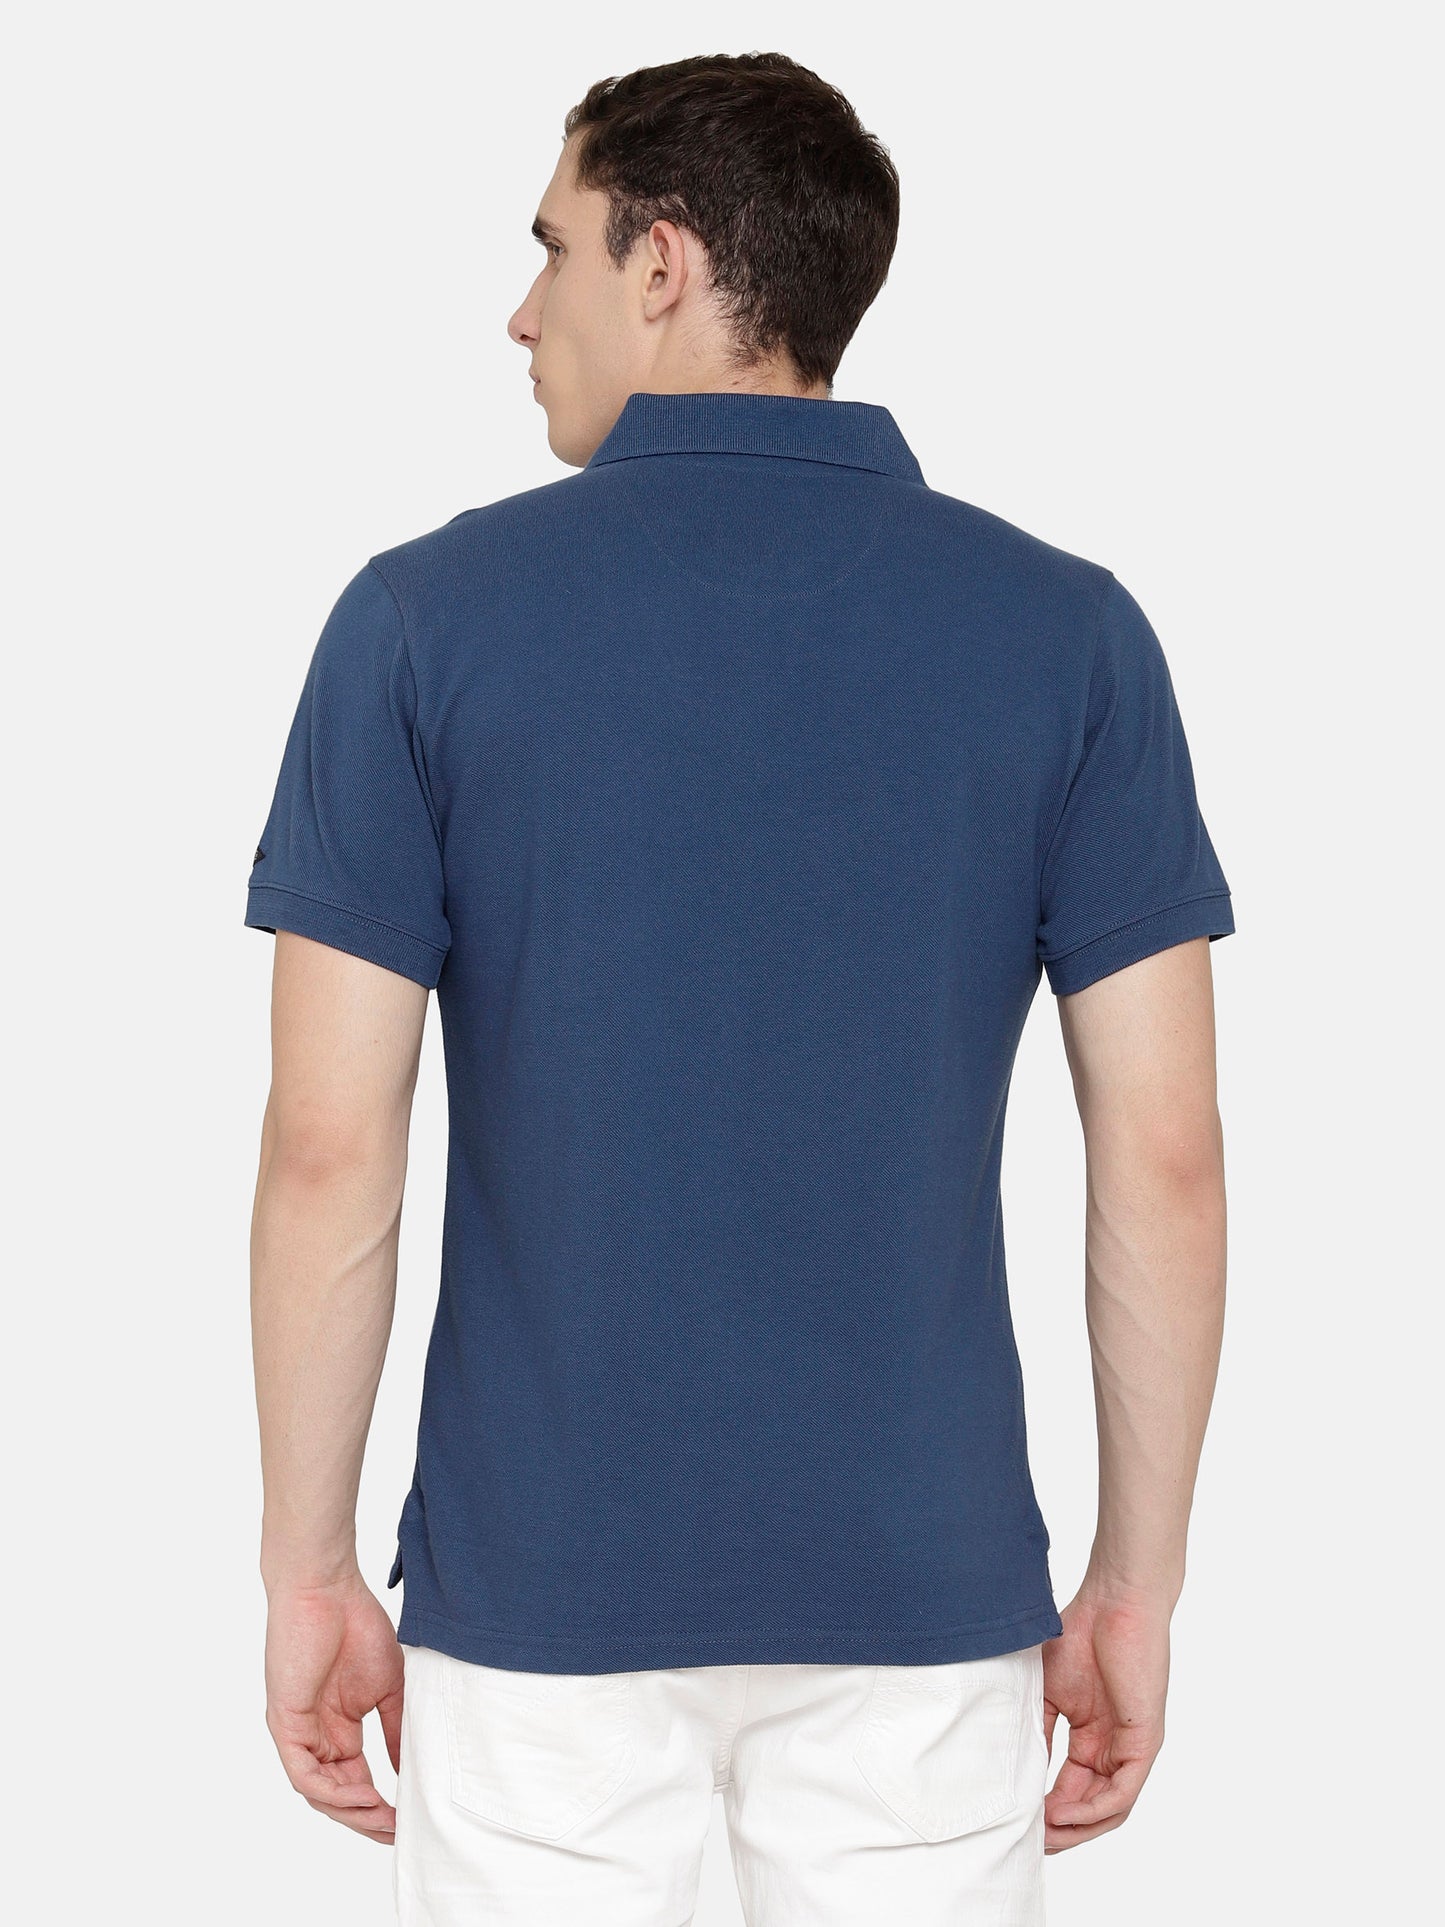 Teal Blue color polo T-Shirt